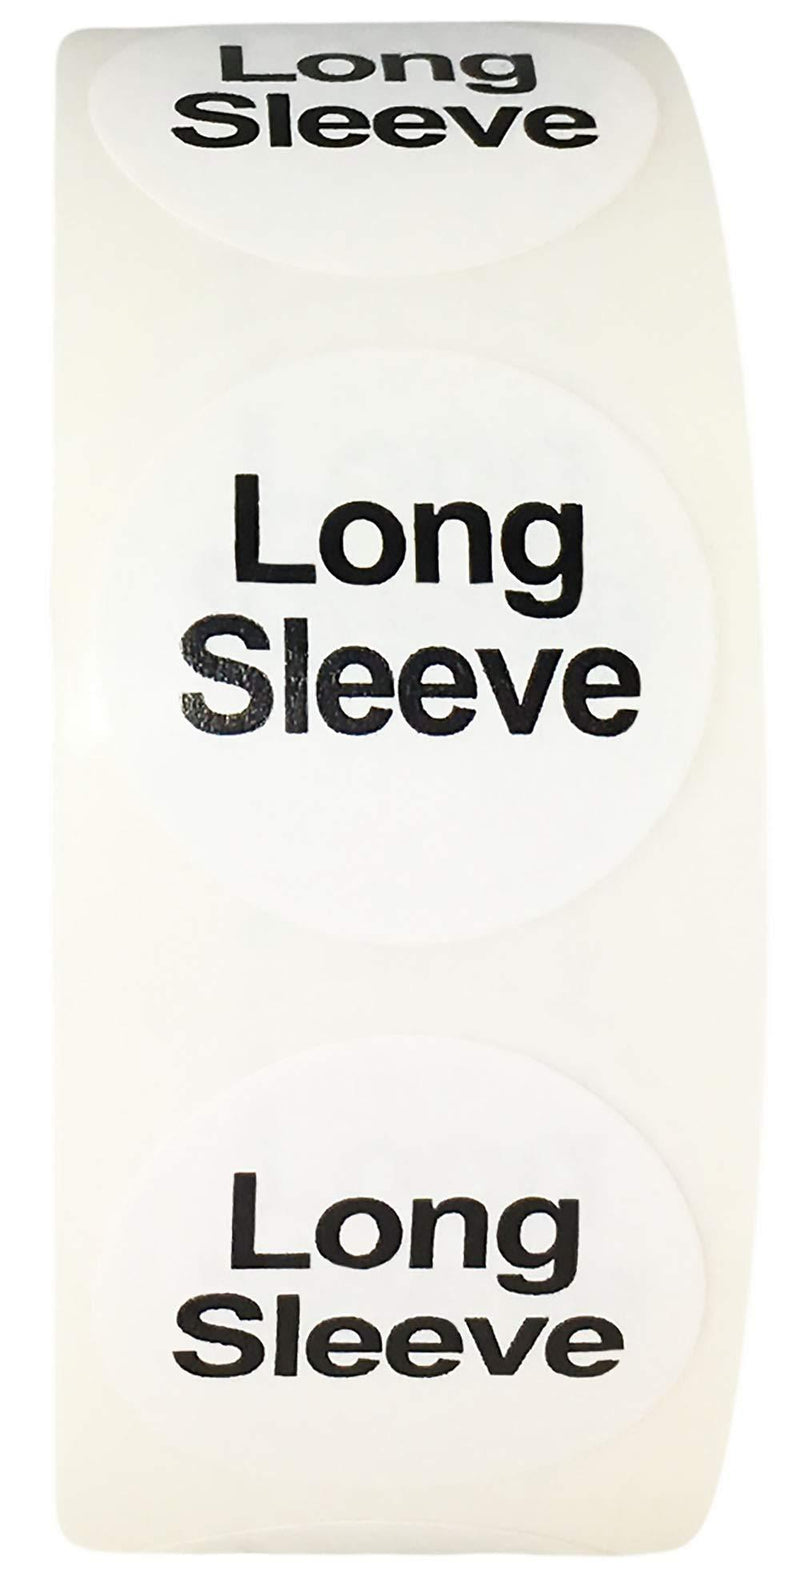 White Circle Long Sleeve Clothing Size Stickers for Retail Apparel 0.75 Inch 500 Total Adhesive Labels